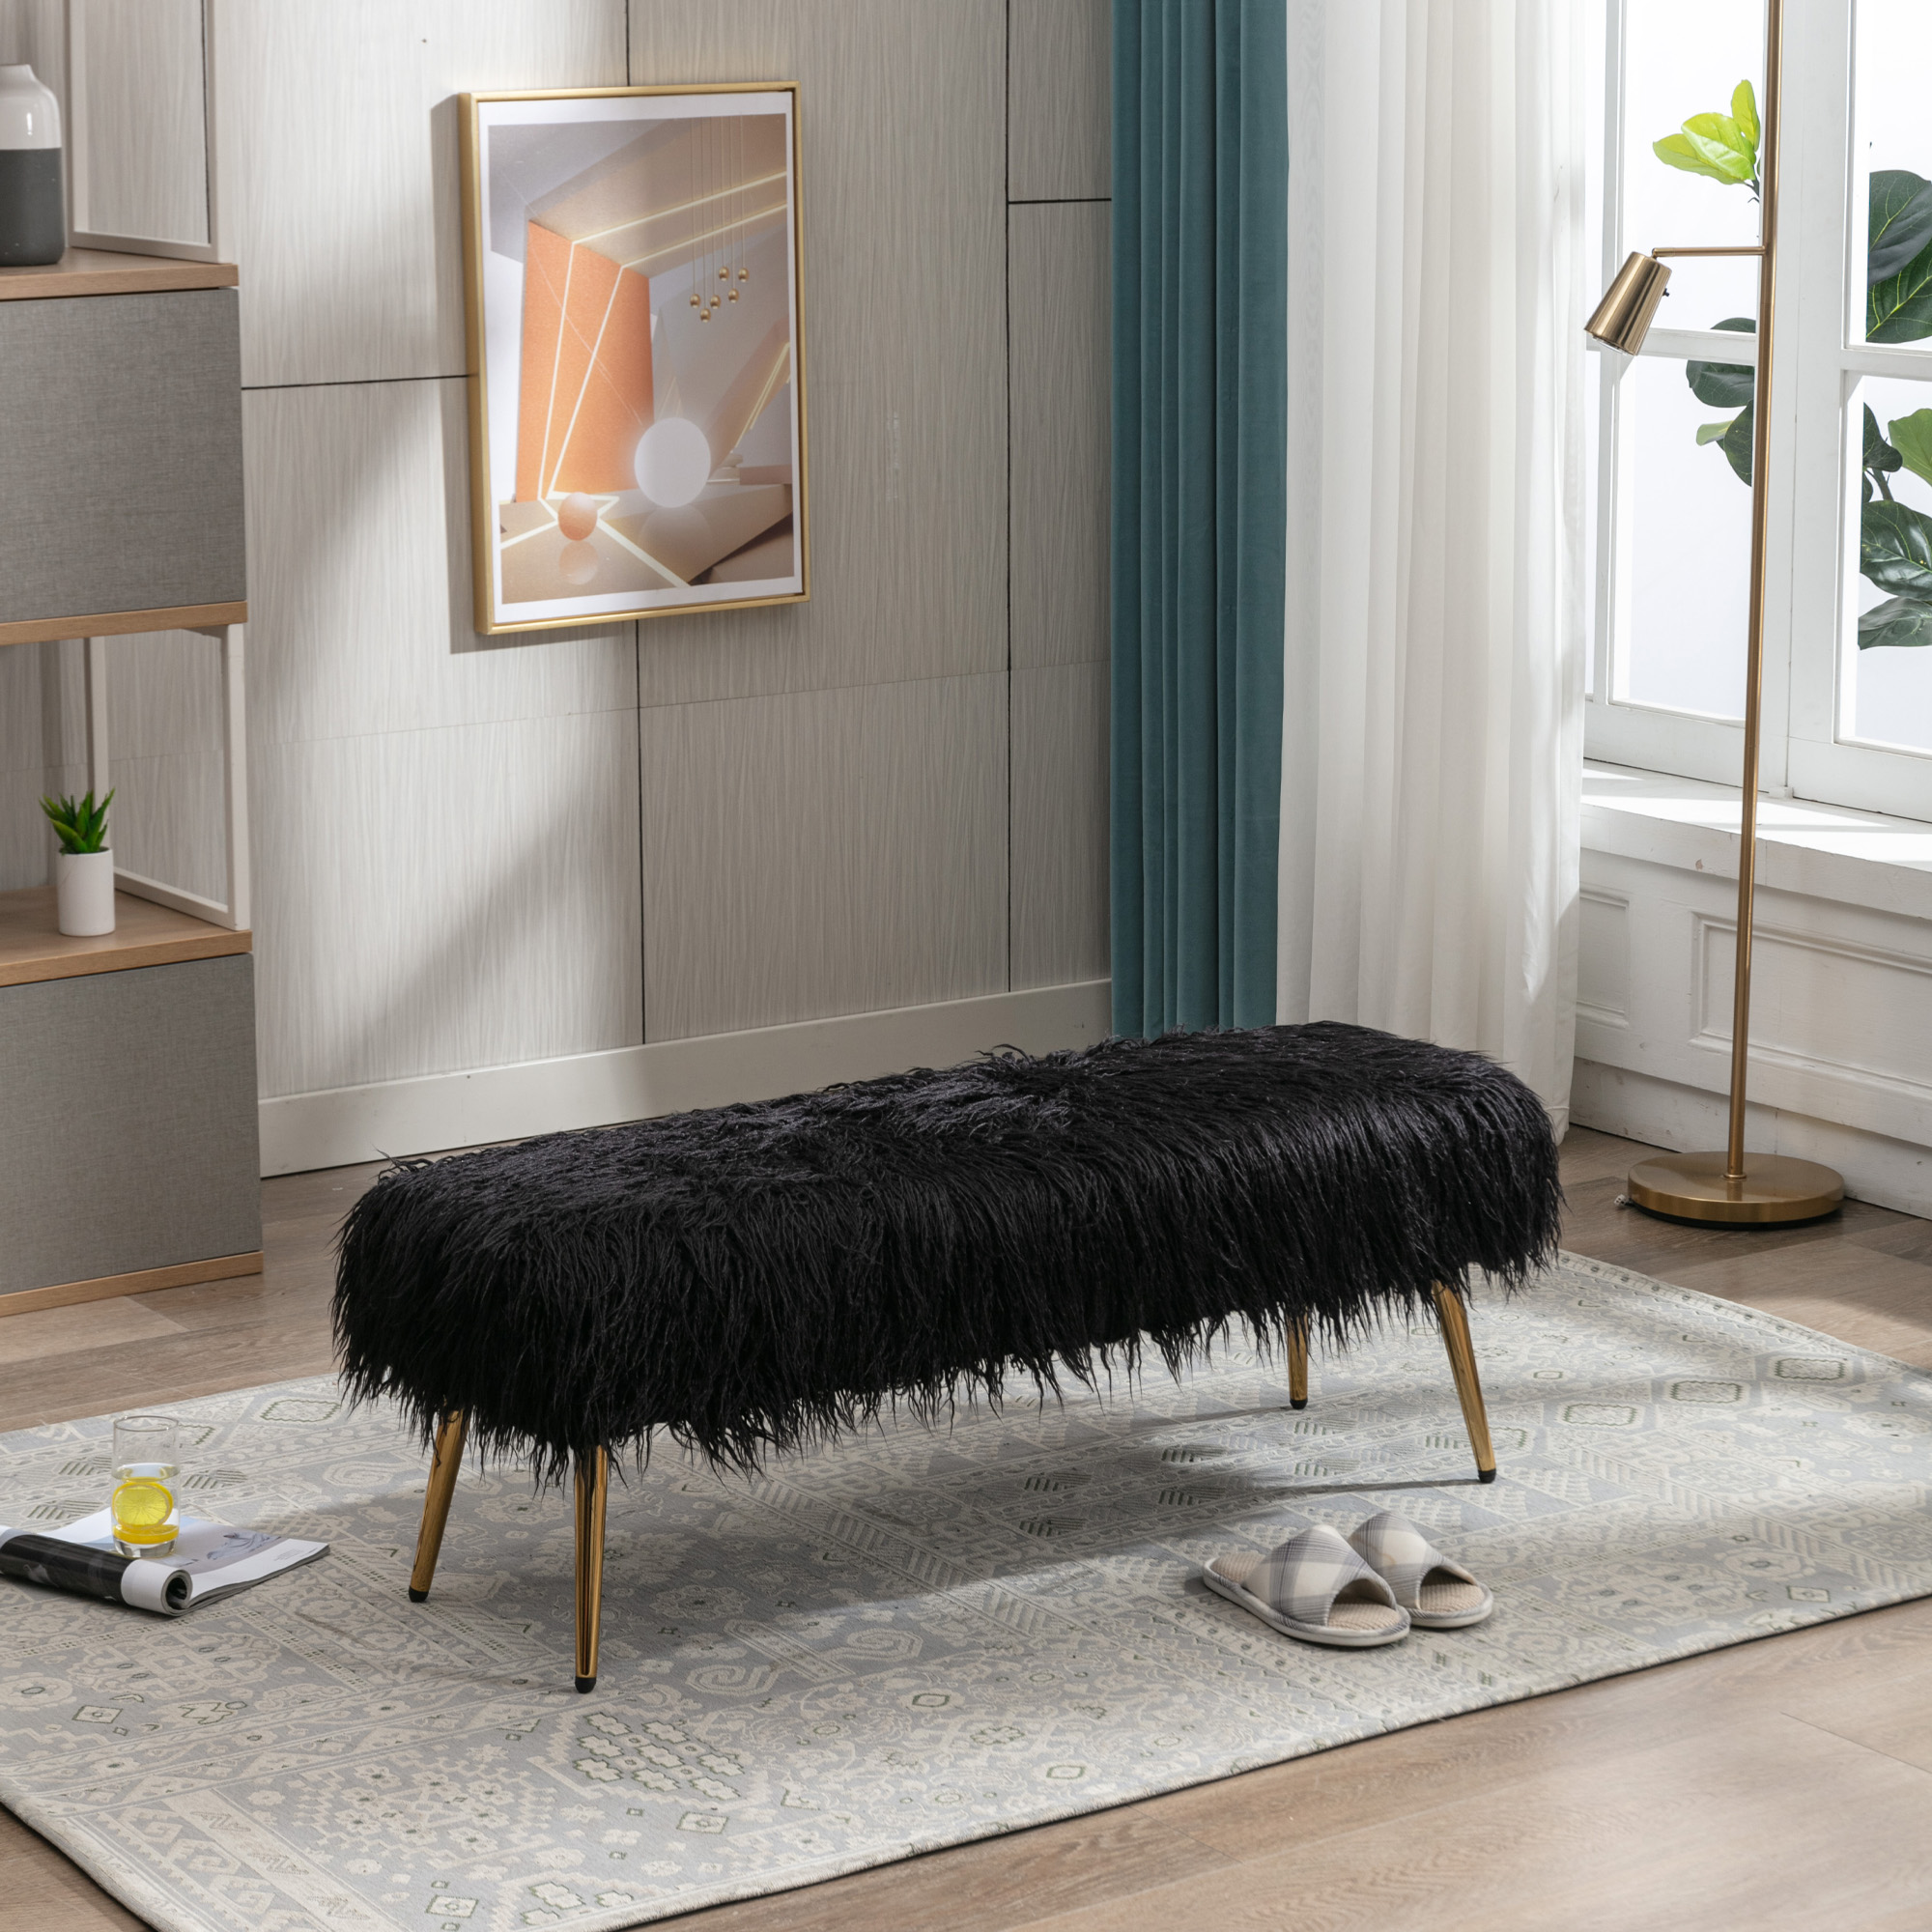 HengMing Faux Fur Plush Ottoman Bench, Modern Fluffy Upholstered Bench for Entryway Dining Room Living Room Bedroom, Black